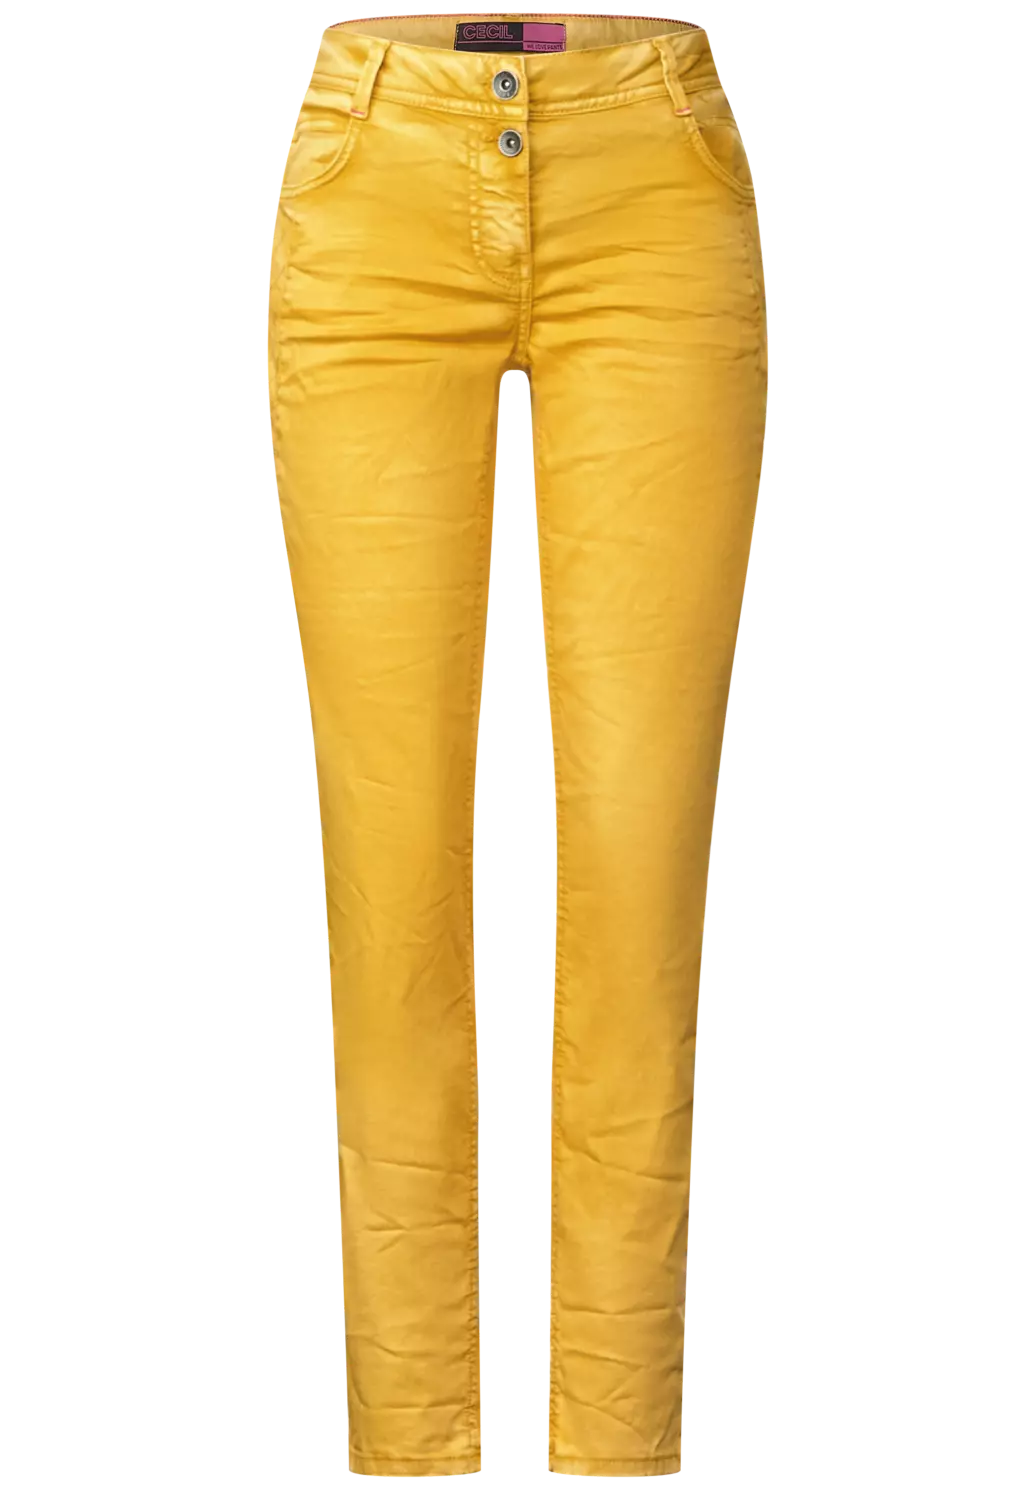 Cotton Gelb | Yellow Curry Hose CECIL Fit Scarlett Blues LLoose - - /